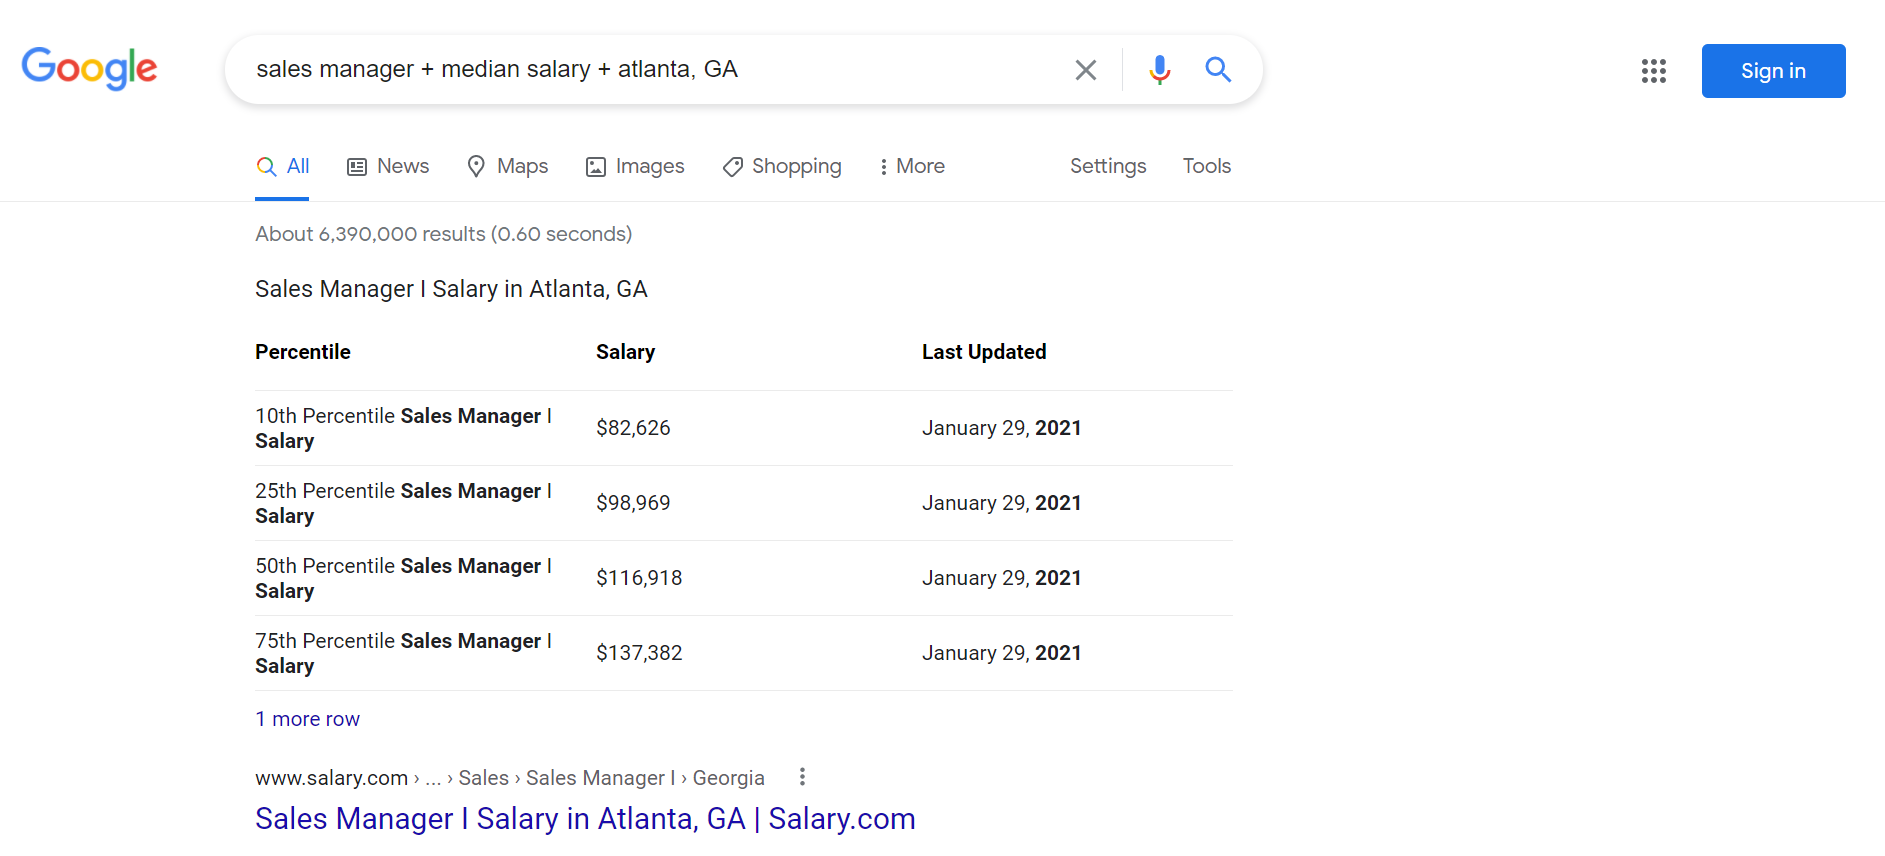 Google Sales Manager Median Salary Example